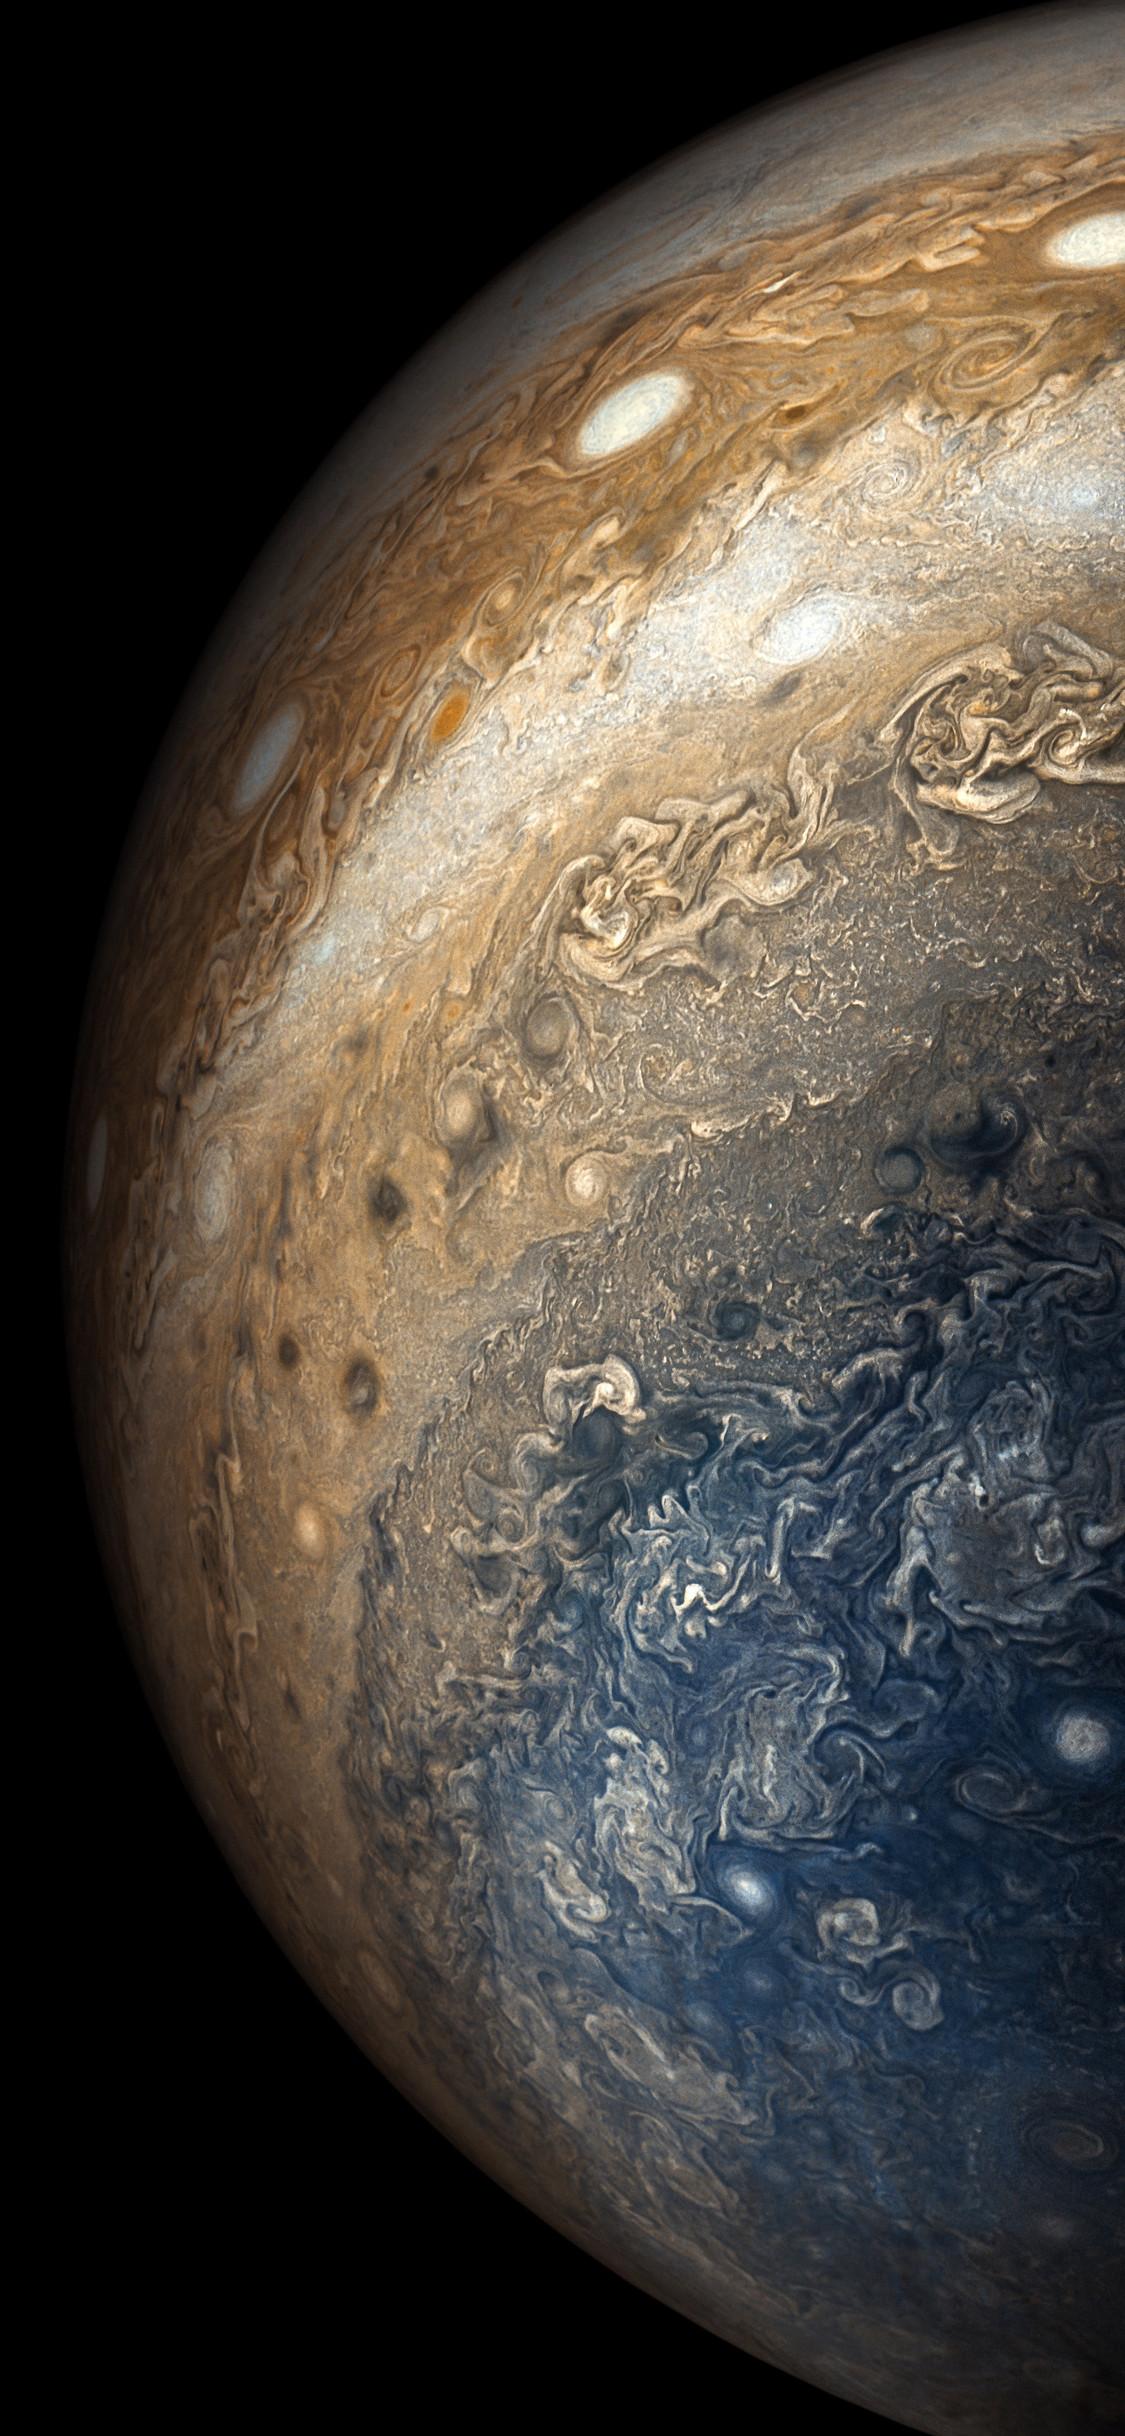 New High Res iPhone Wallpapers for Each Planet